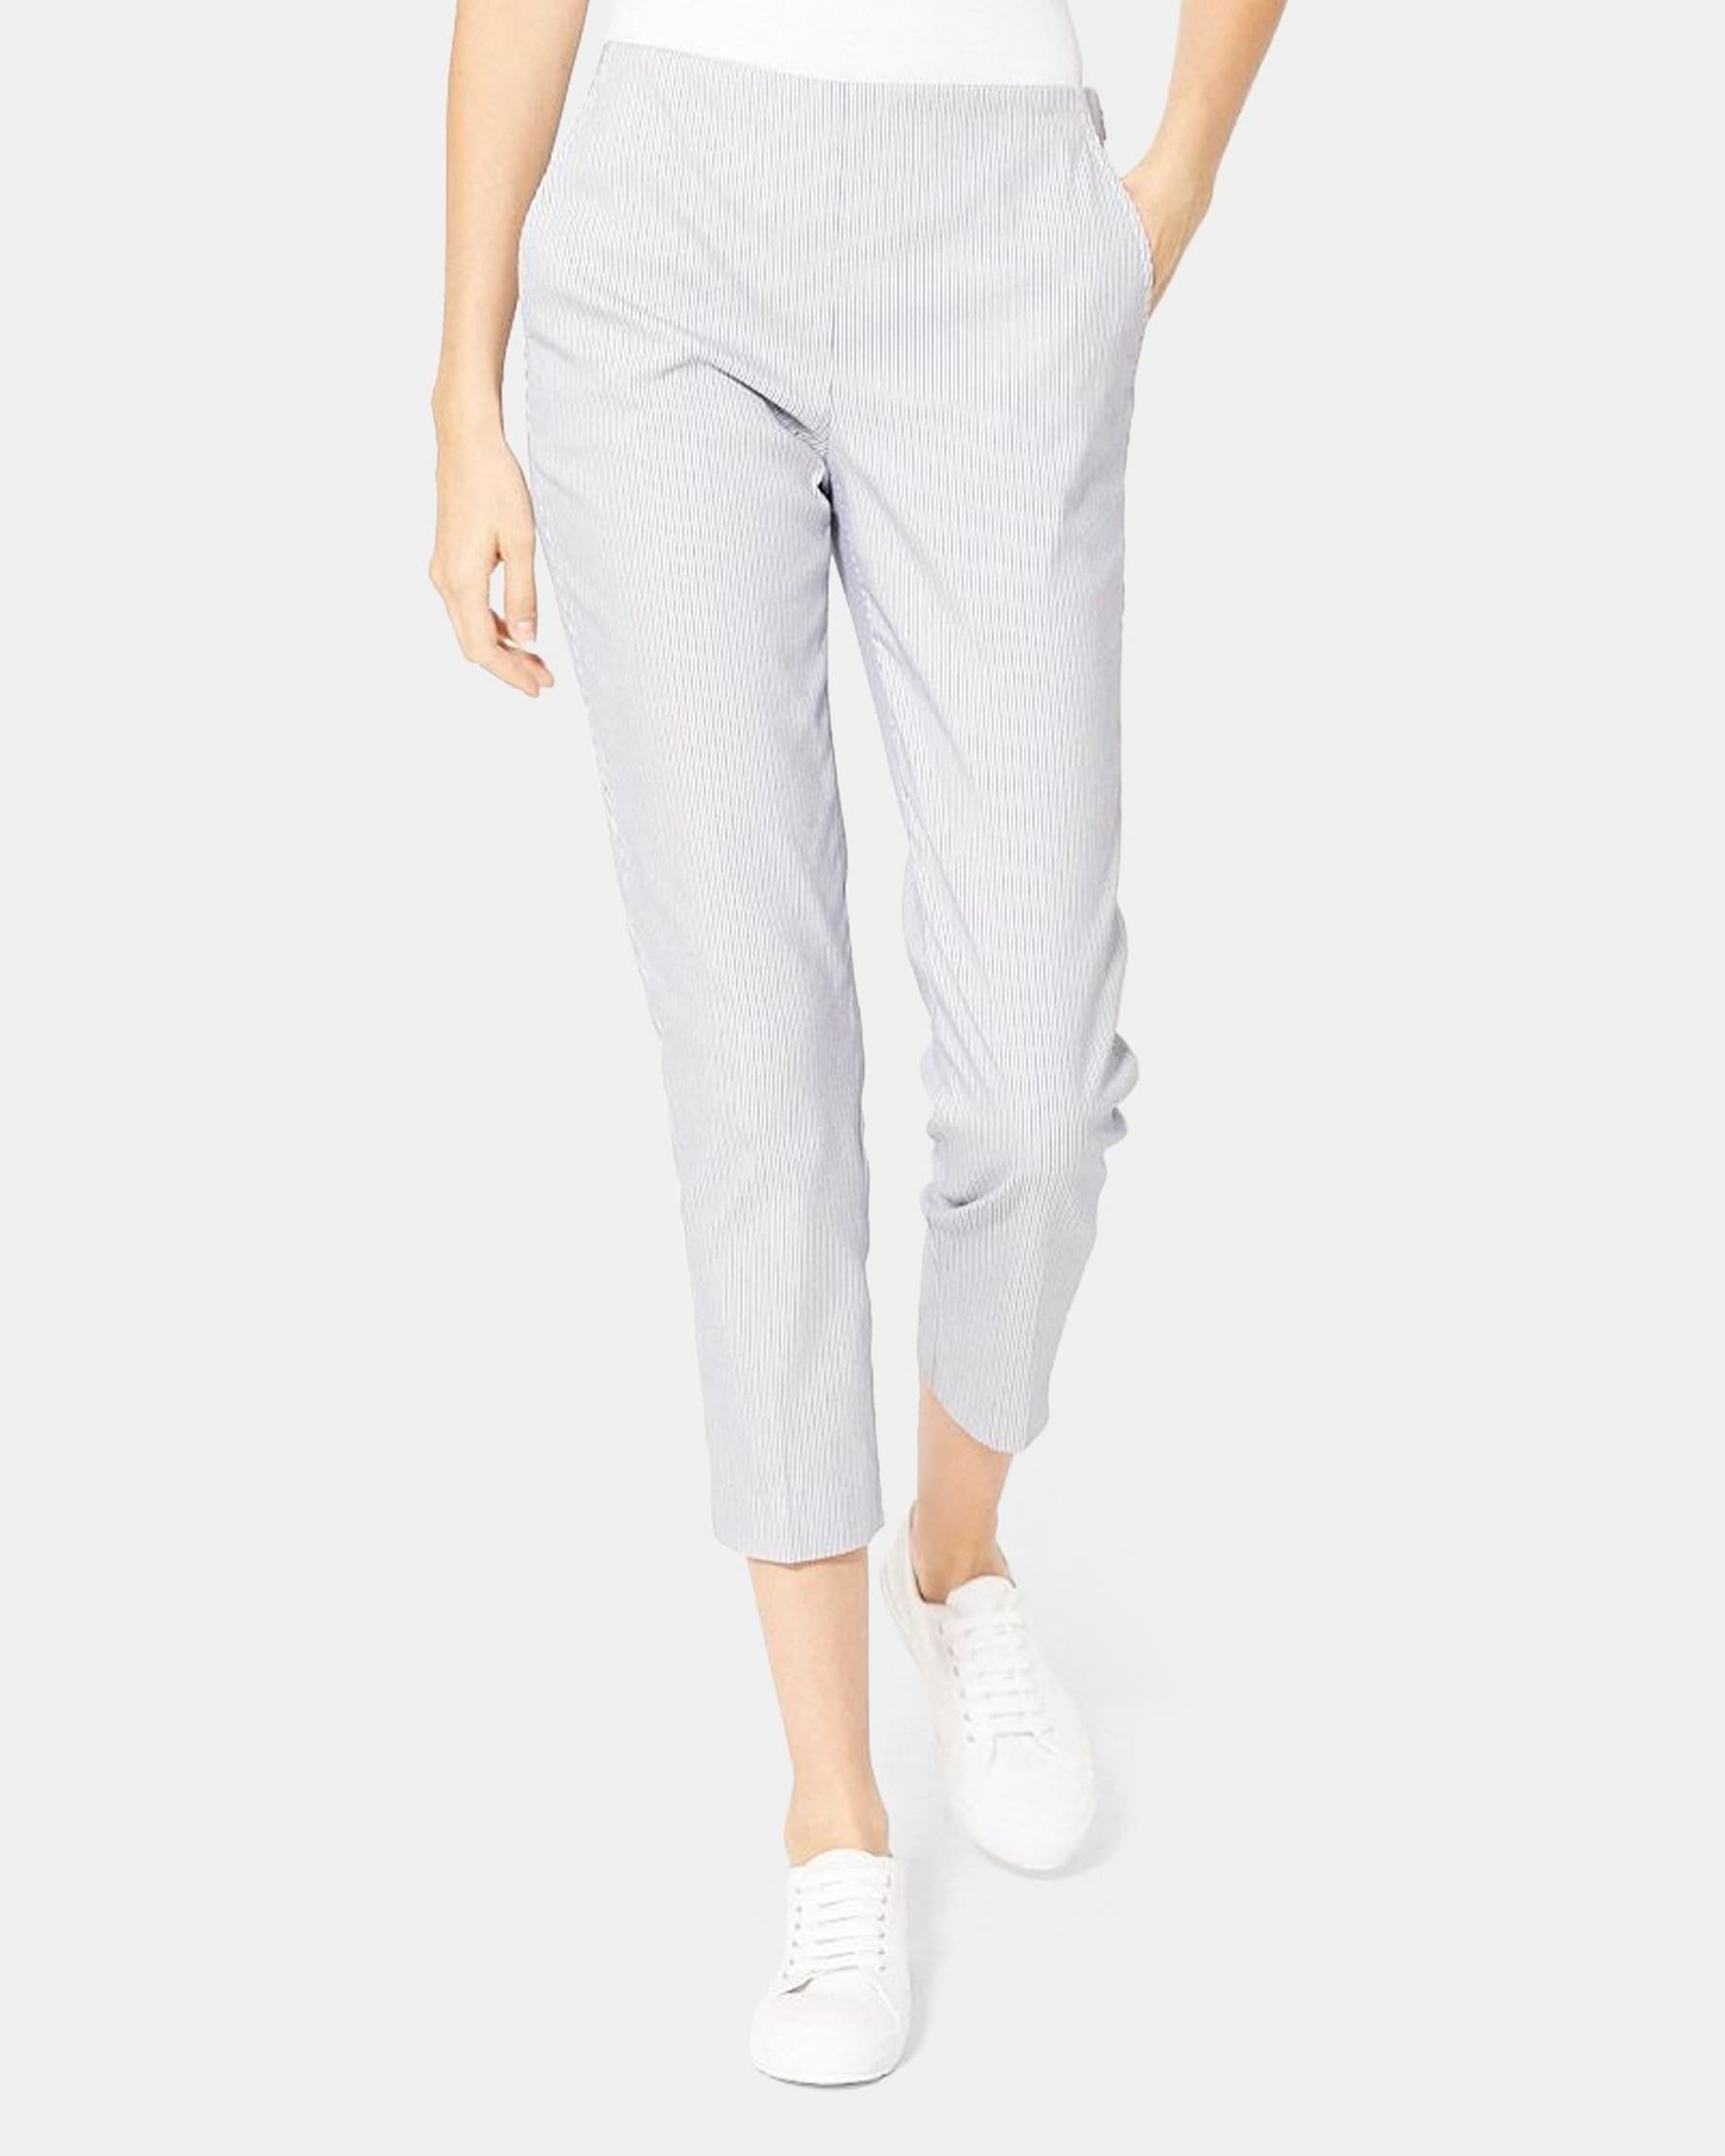 Theory Slim Cropped Pant in Stretch Cotton Blend